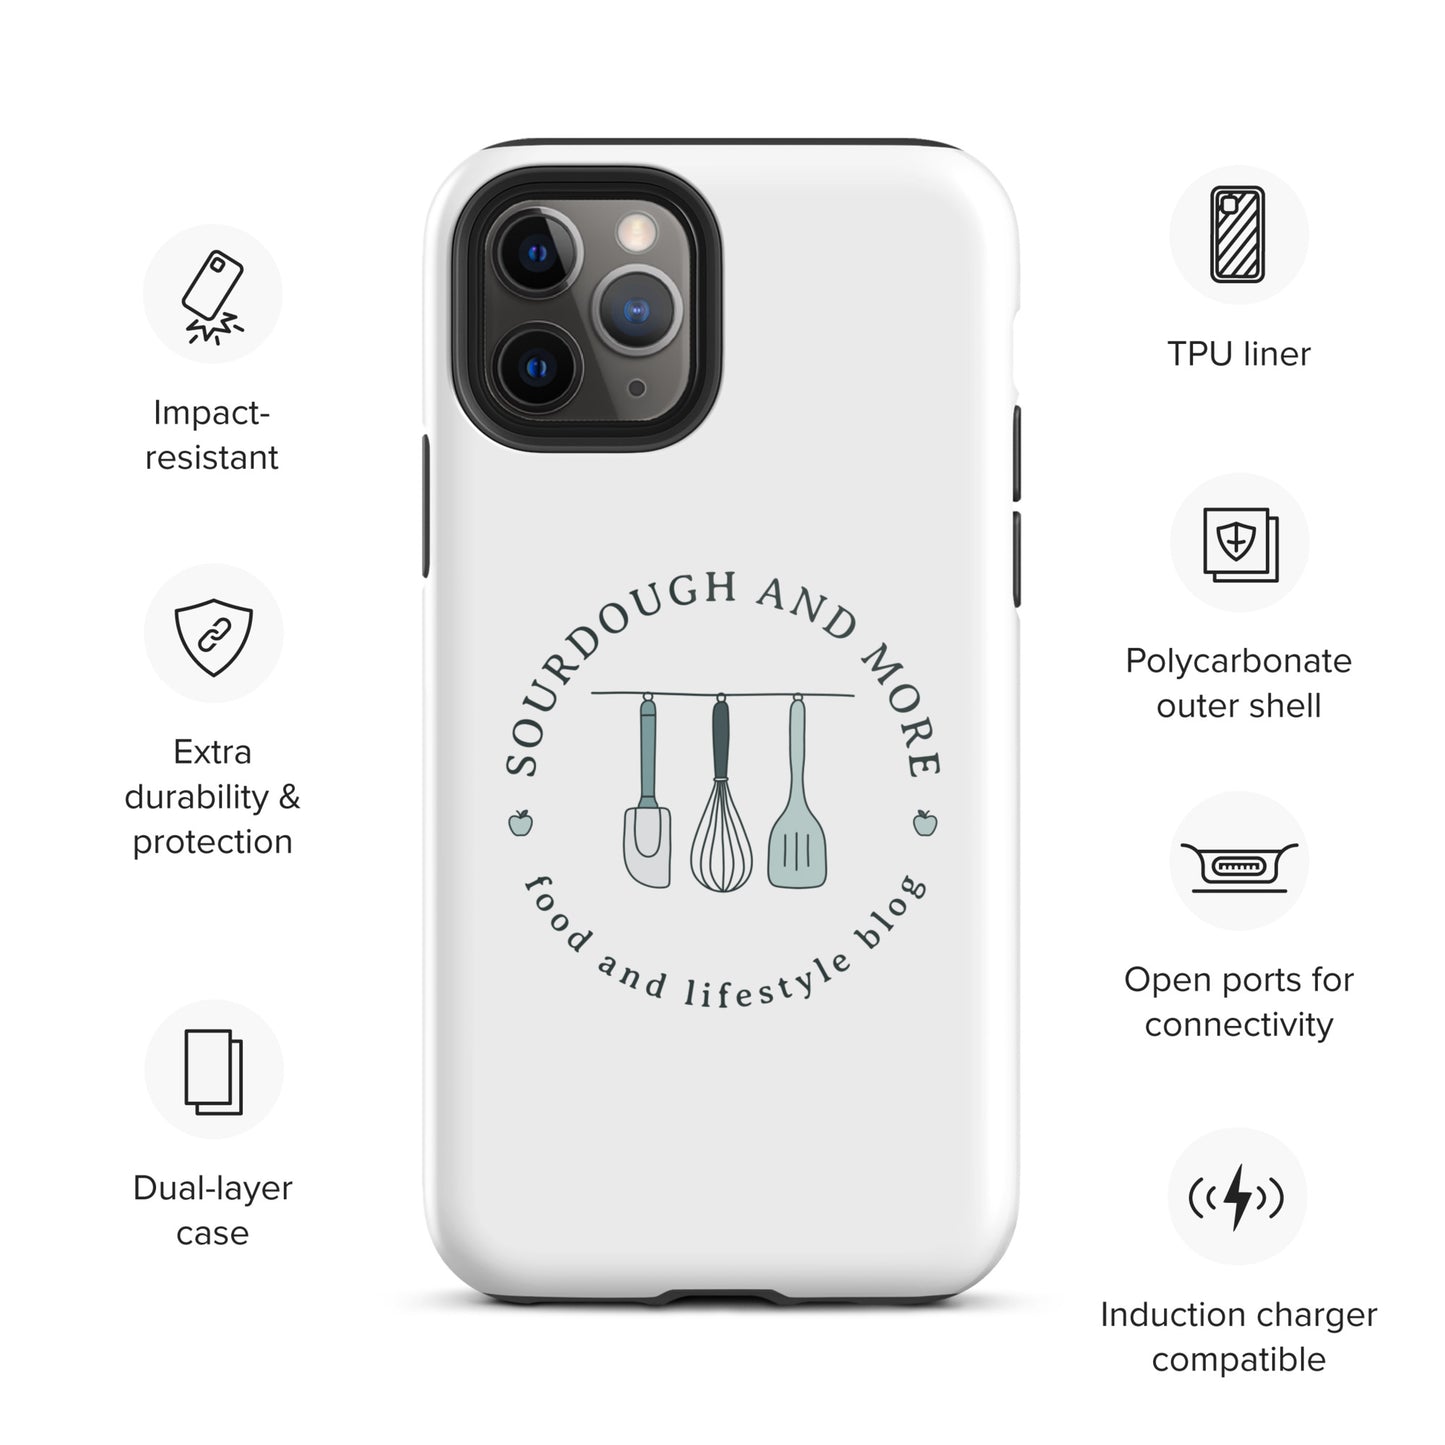 Sourdough and More Tough Case for iPhone®